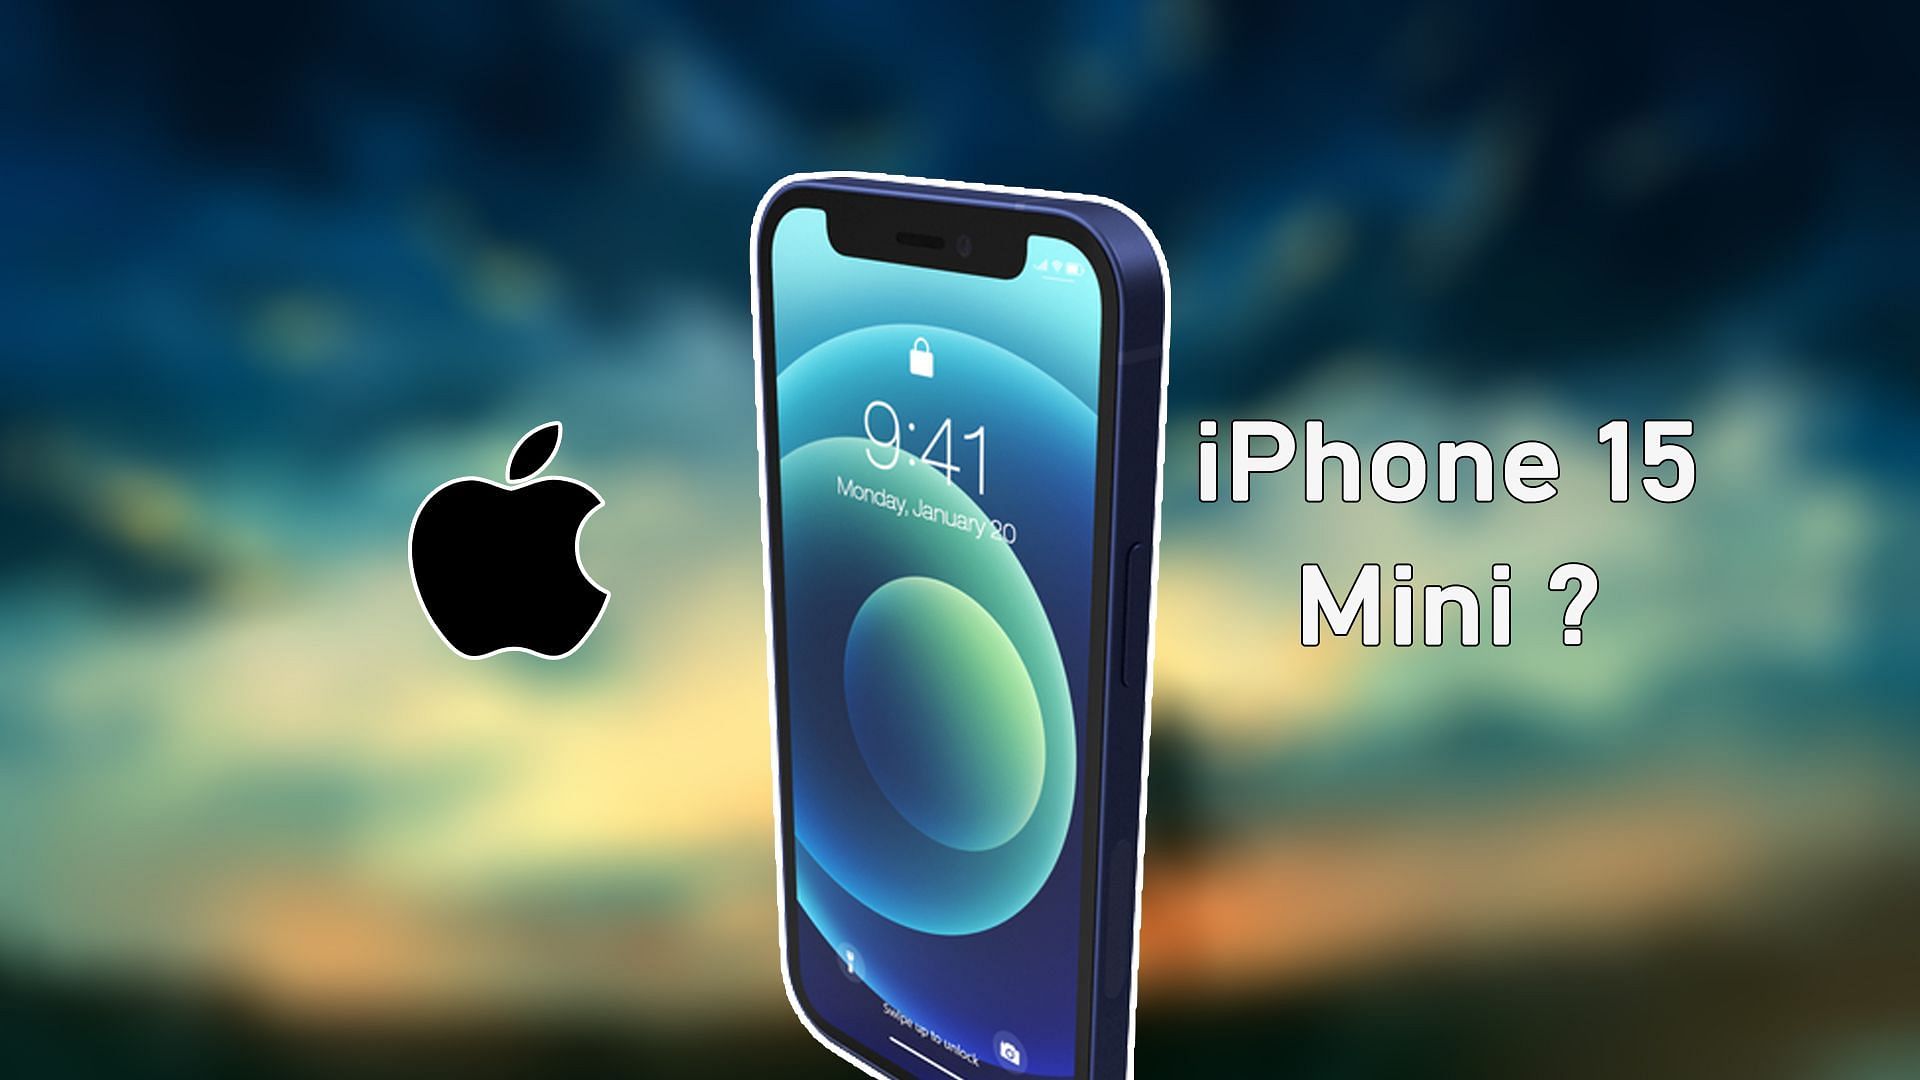 Apple might discontinue iPhone 13 Mini after iPhone 15 announcement